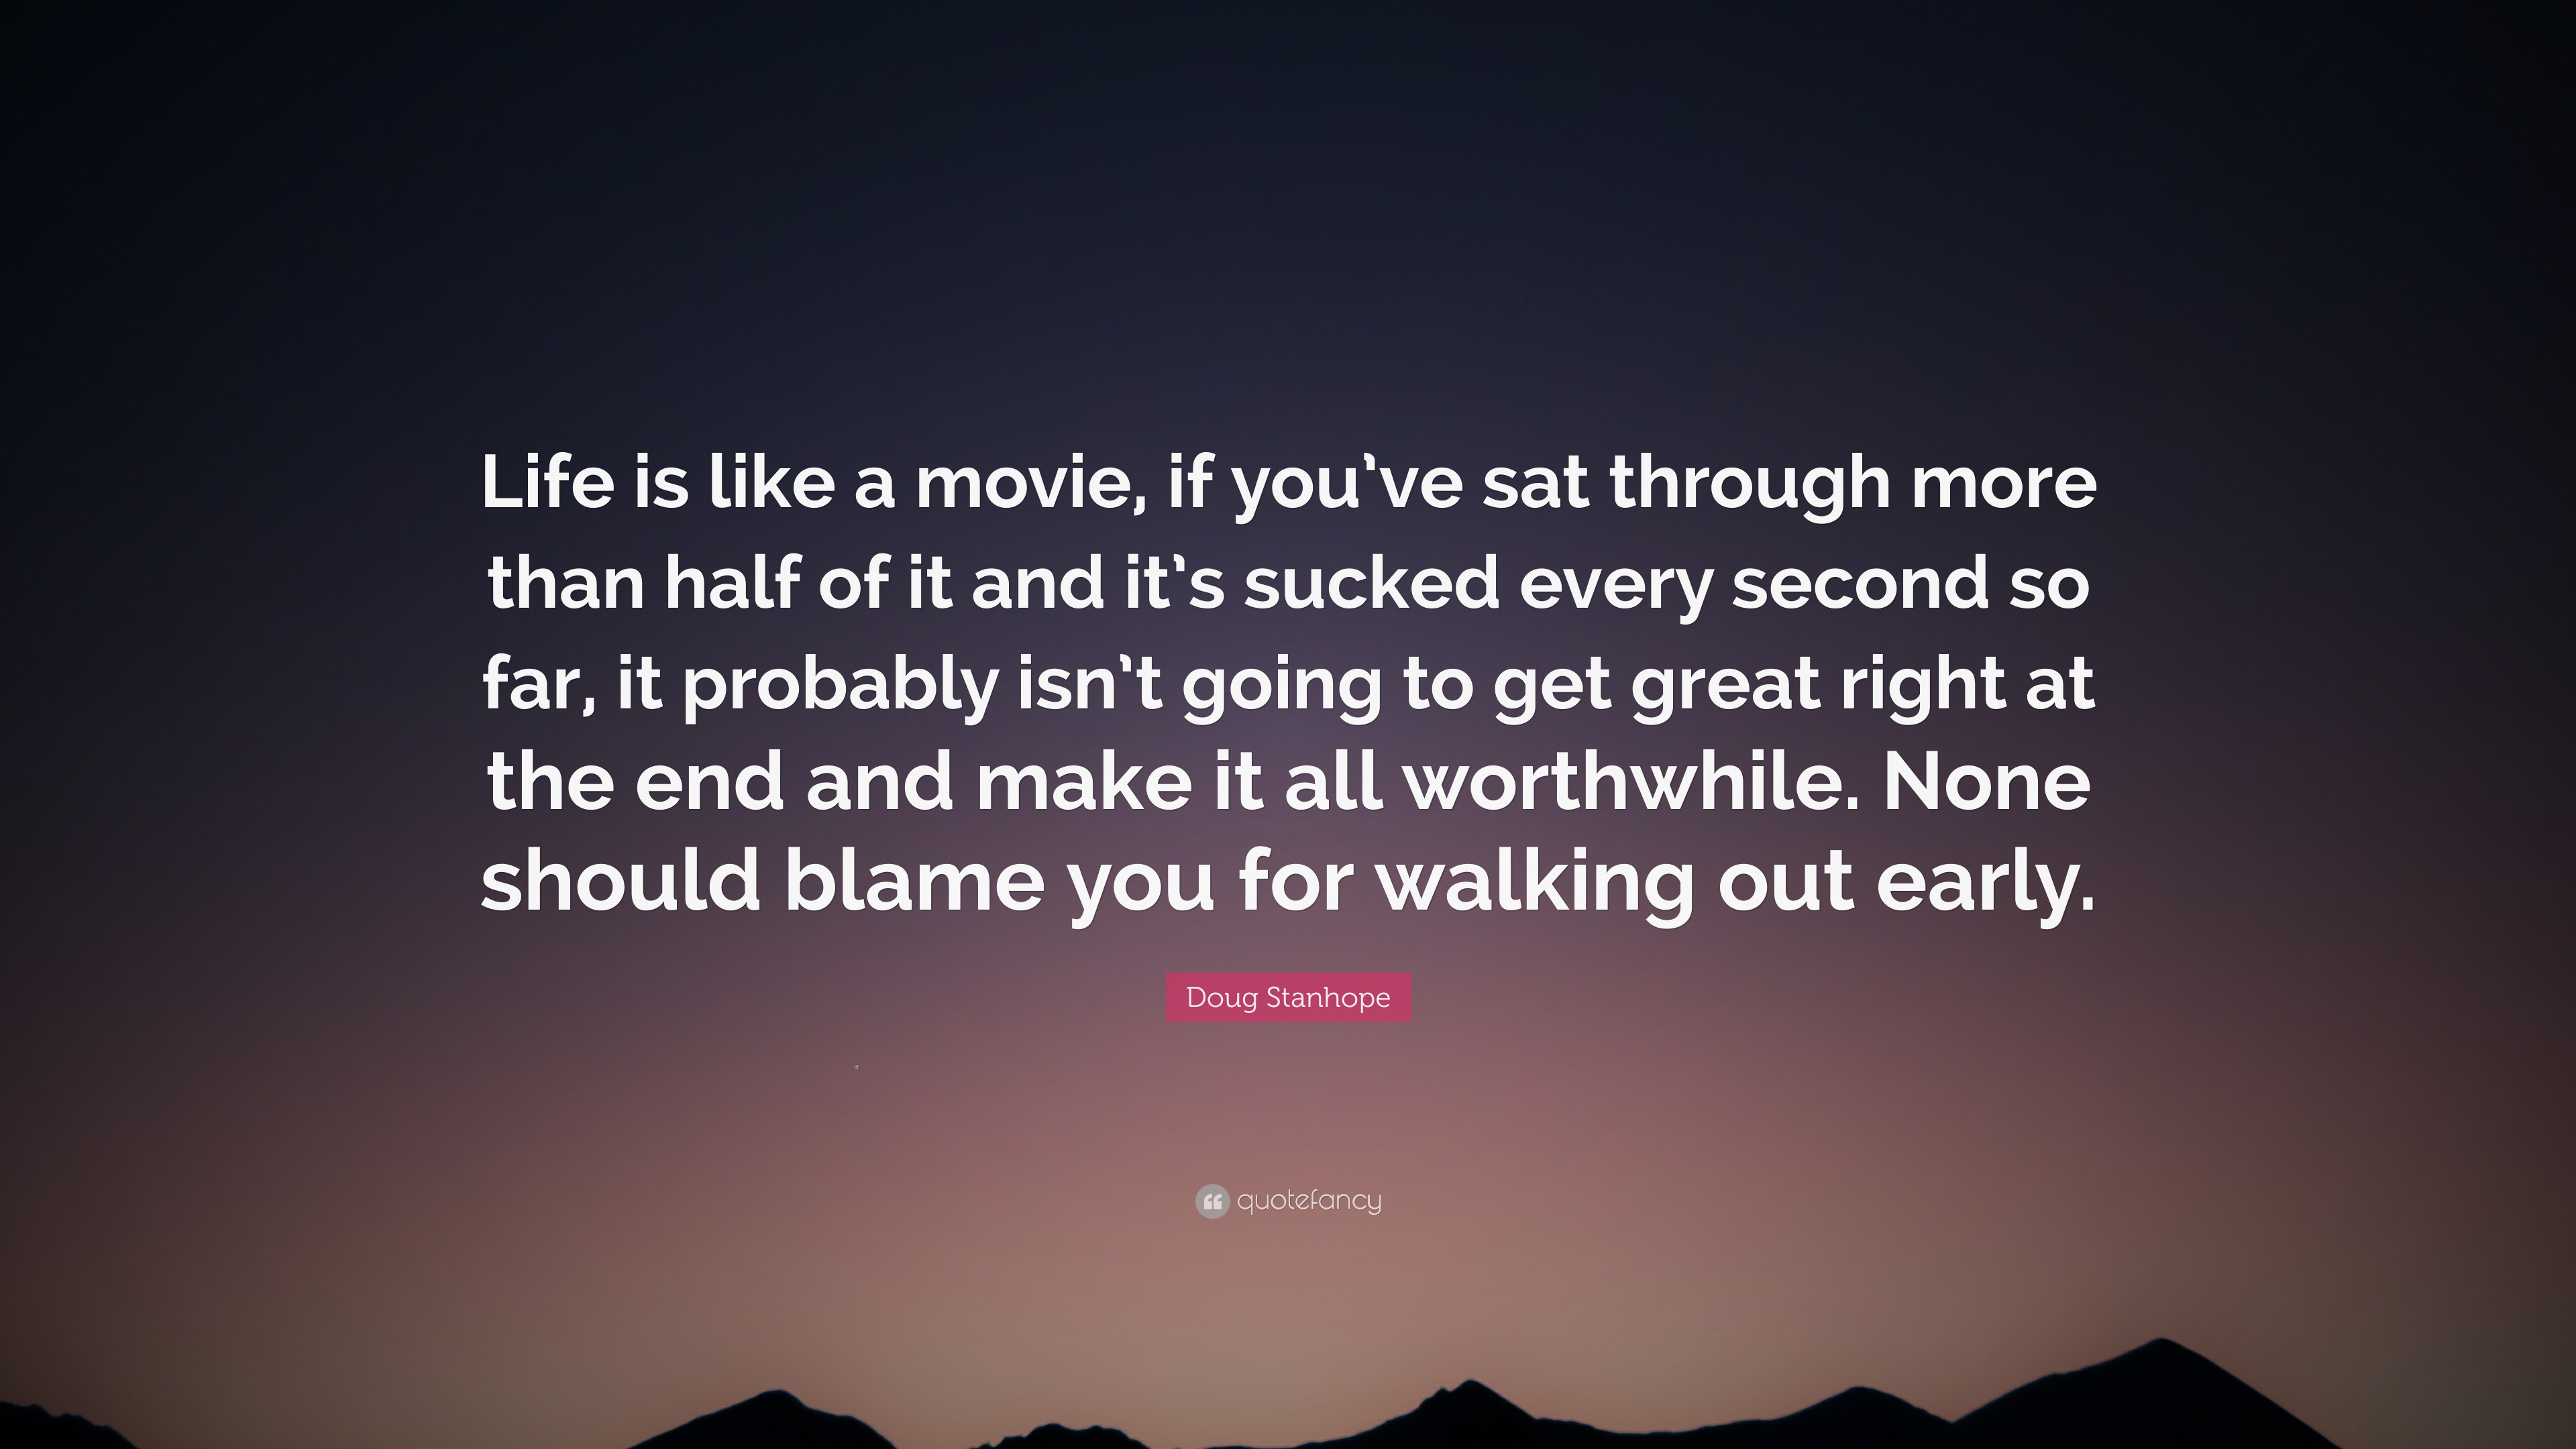 Doug Stanhope Quote Life Is Like A Movie If You Ve Sat Through More Than Half Of It And It S Sucked Every Second So Far It Probably Isn T